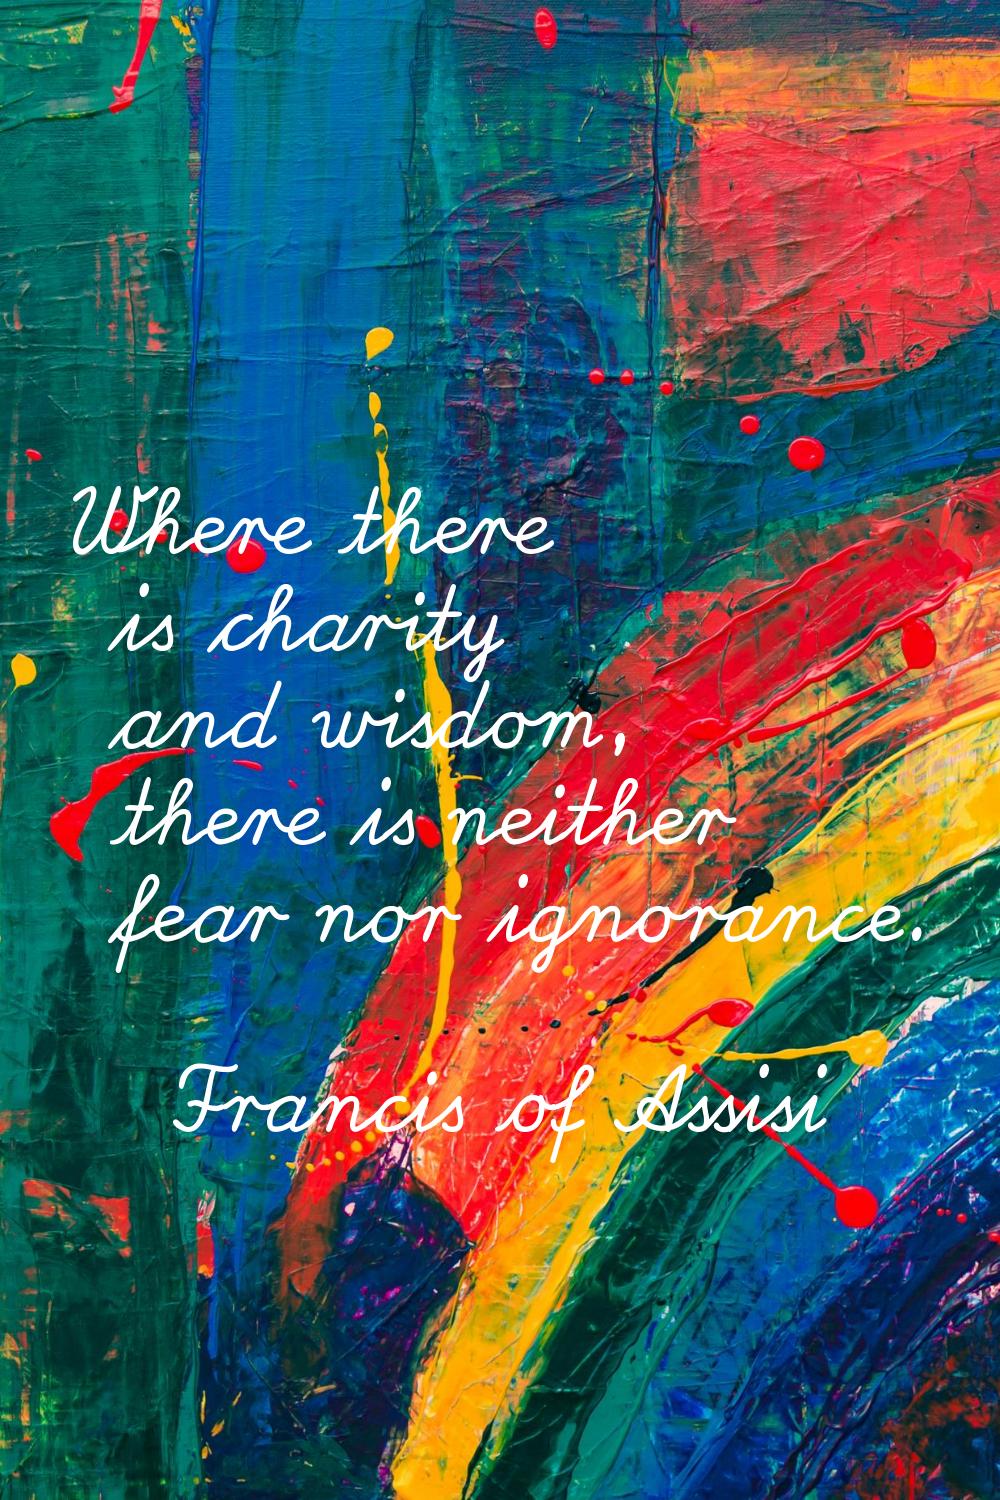 Where there is charity and wisdom, there is neither fear nor ignorance.